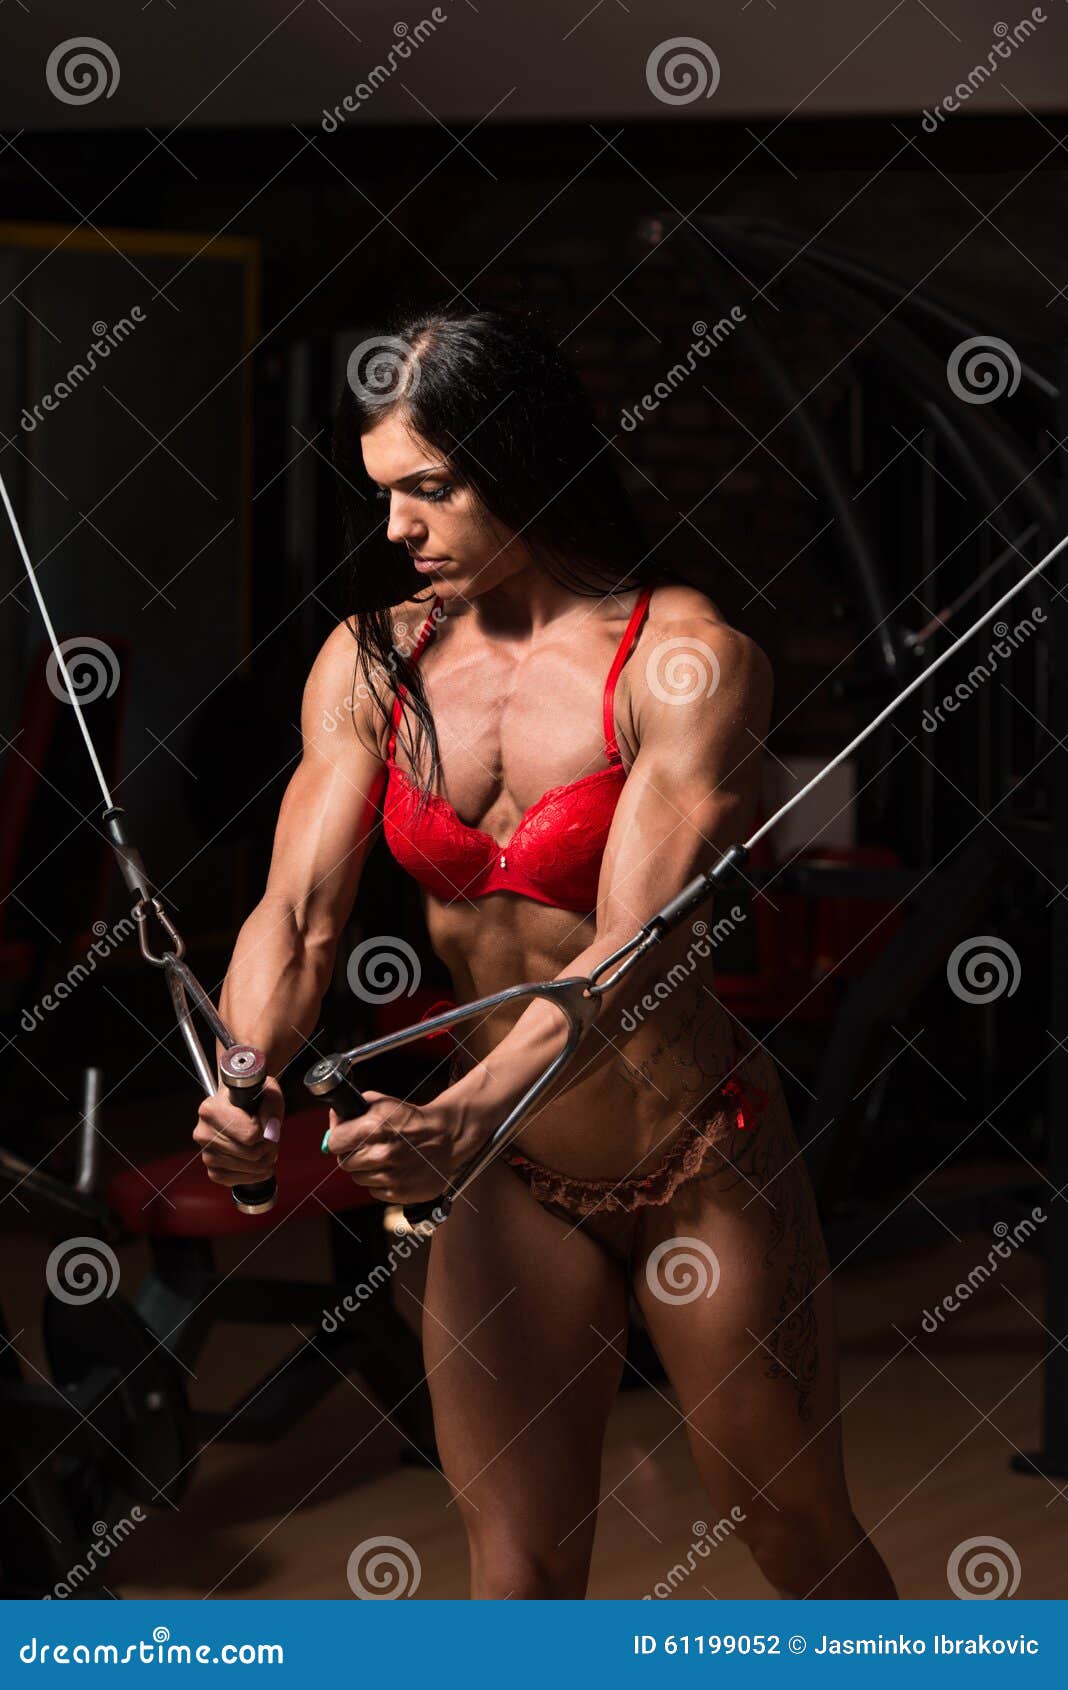 Chest Workout with Cables in Underwear Stock Photo - Image of